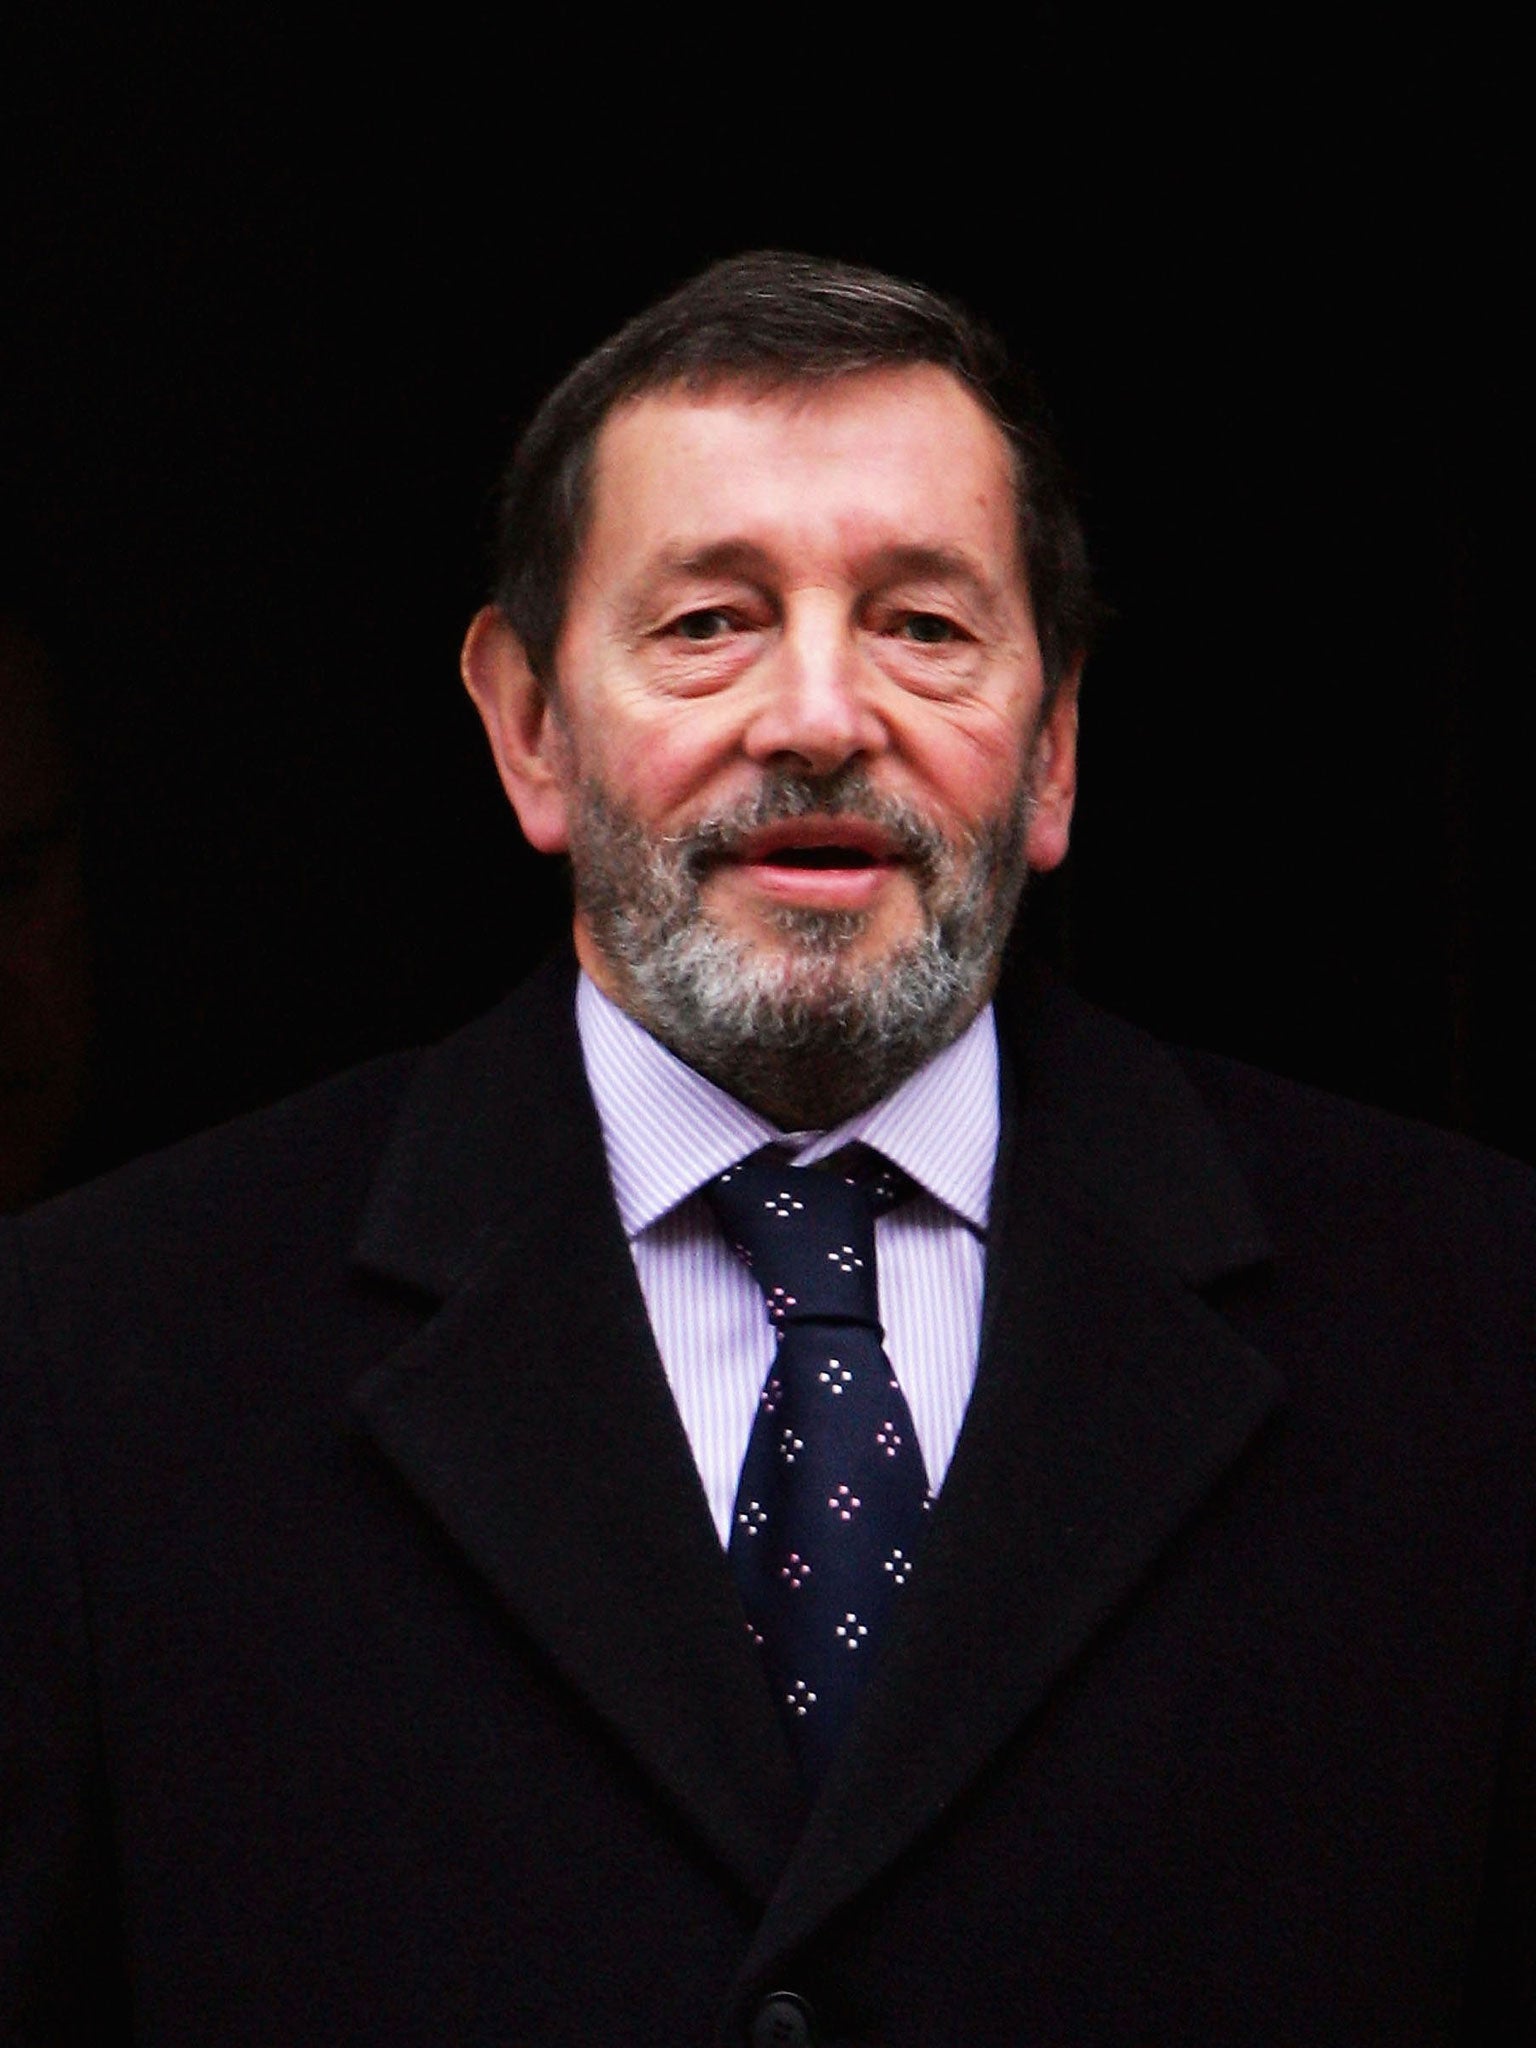 As Home Secretary, David Blunkett recorded a meeting in his office with Andy Coulson in which the News of the World editor challenged the politician over an affair with a married woman